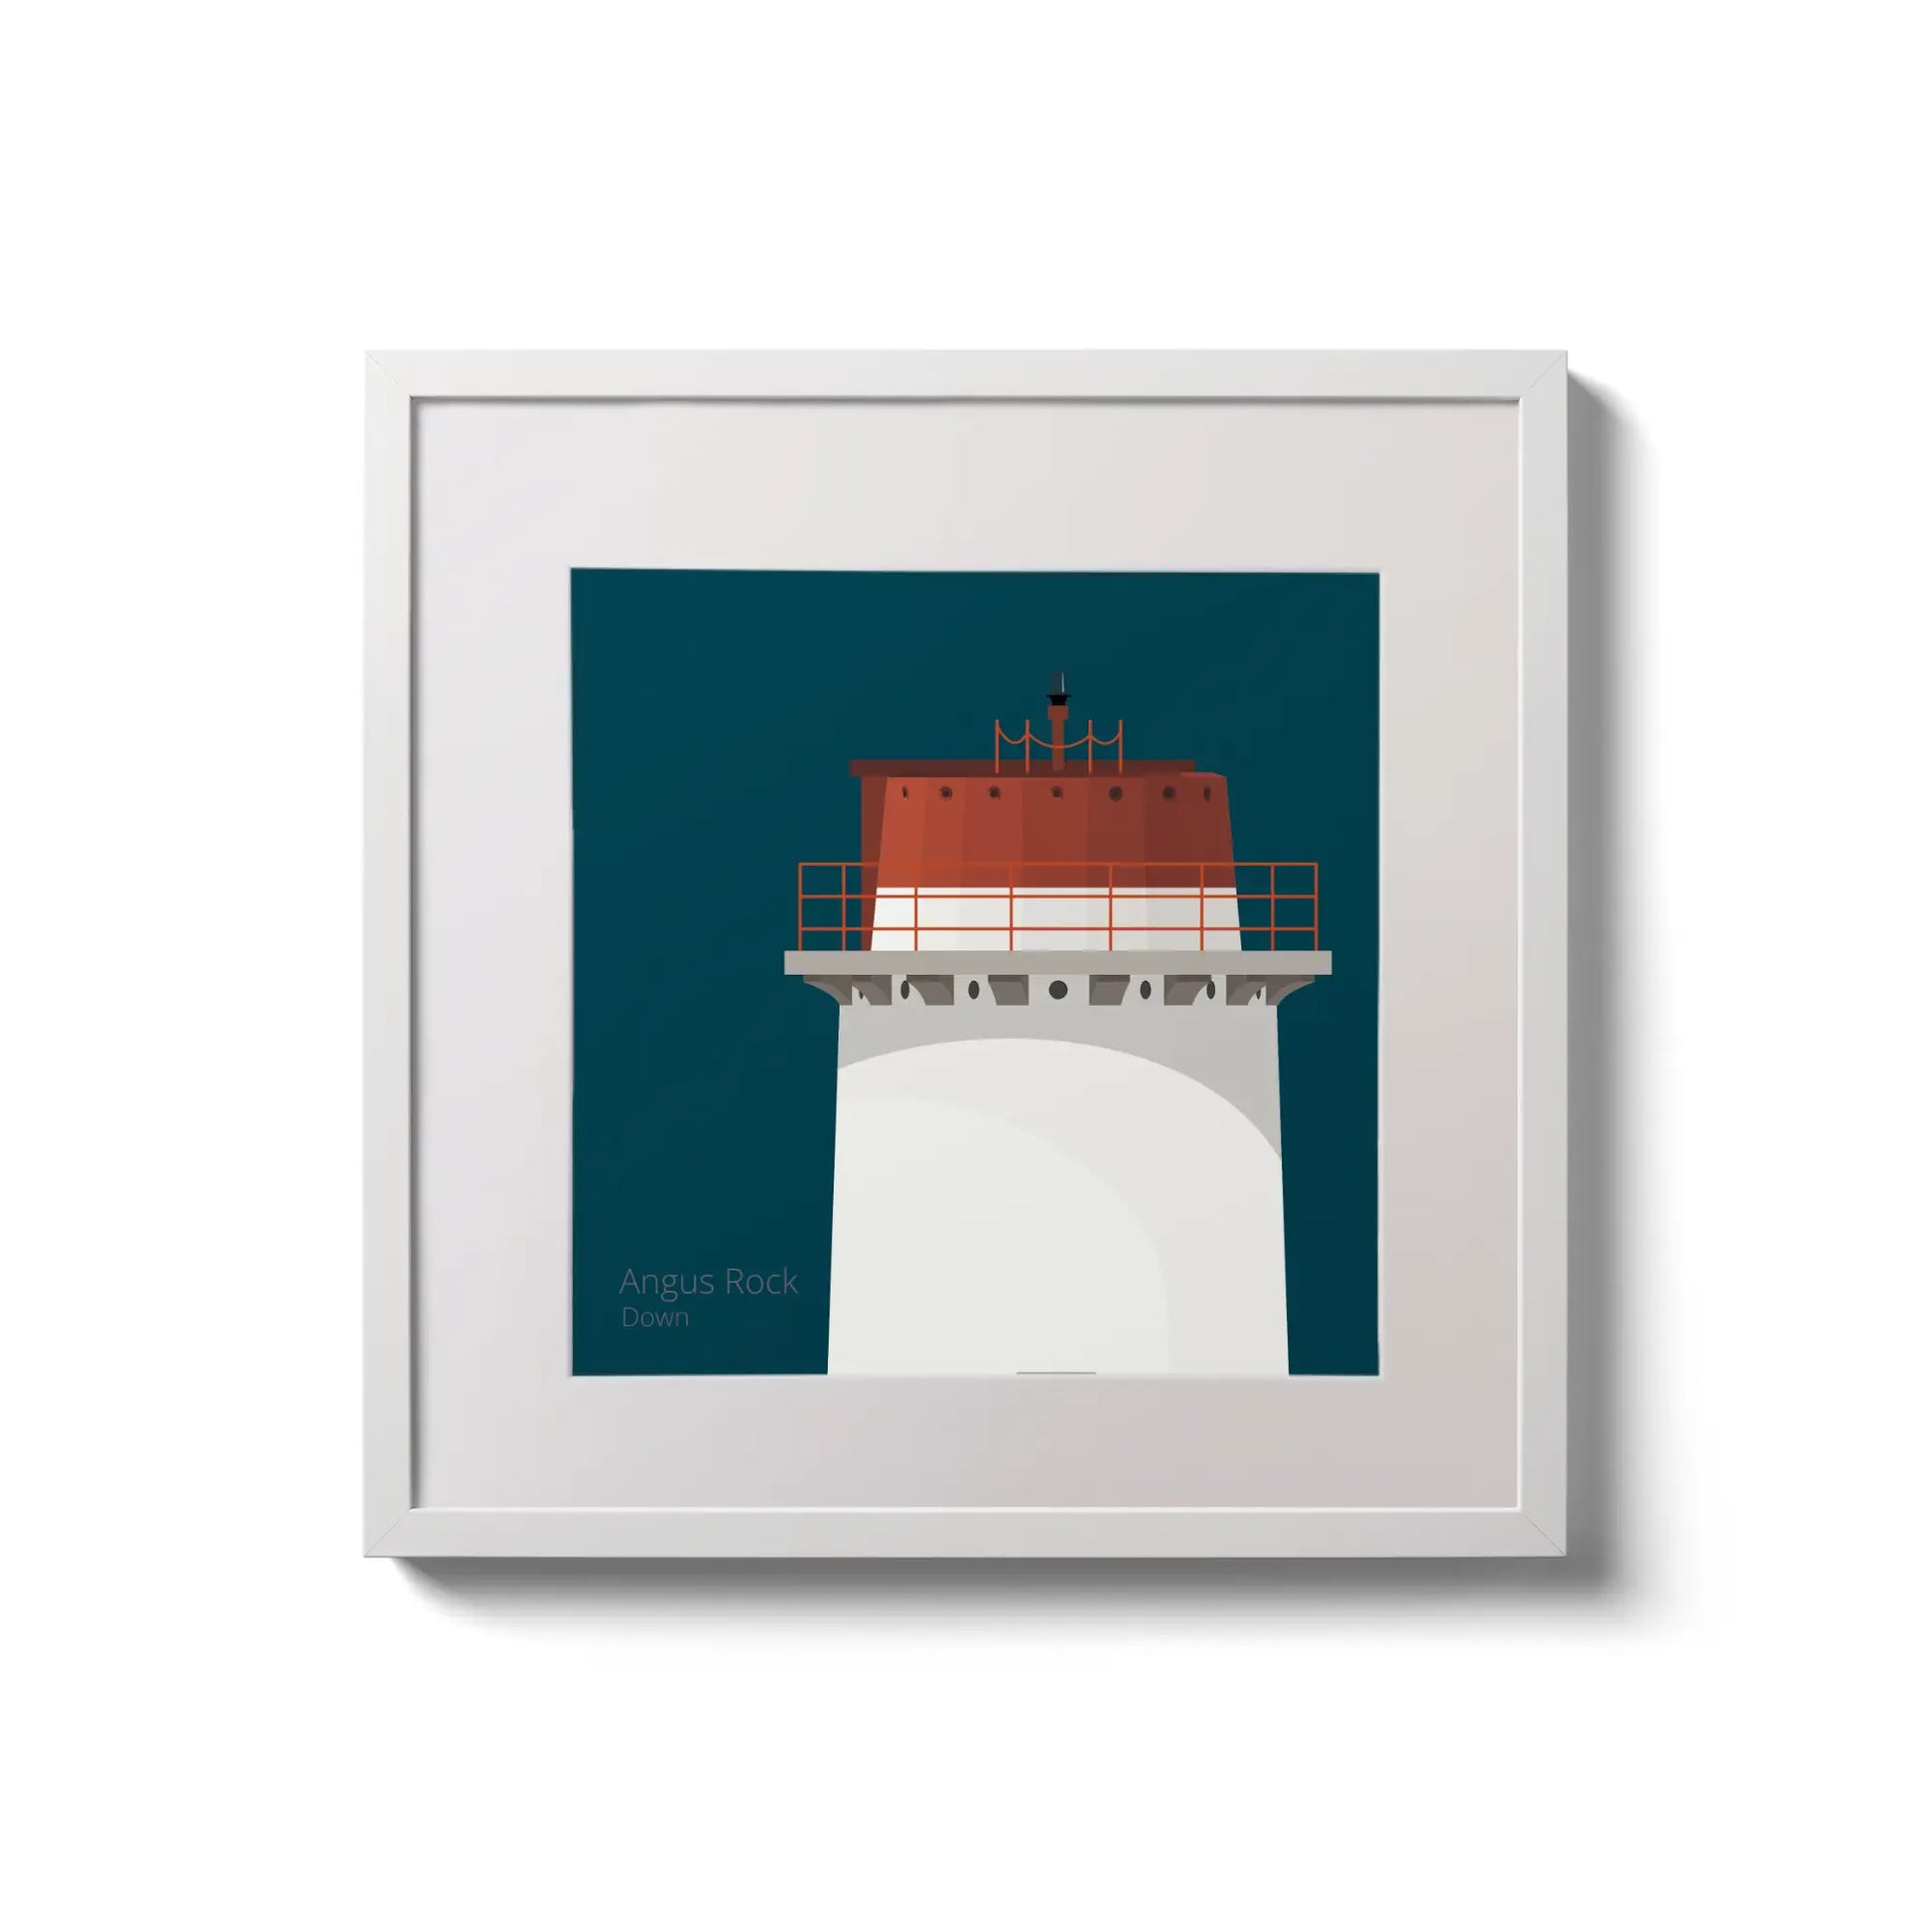 Framed wall art decoration Angus Rock lighthouse on a midnight blue background,  in a white square frame measuring 20x20cm.